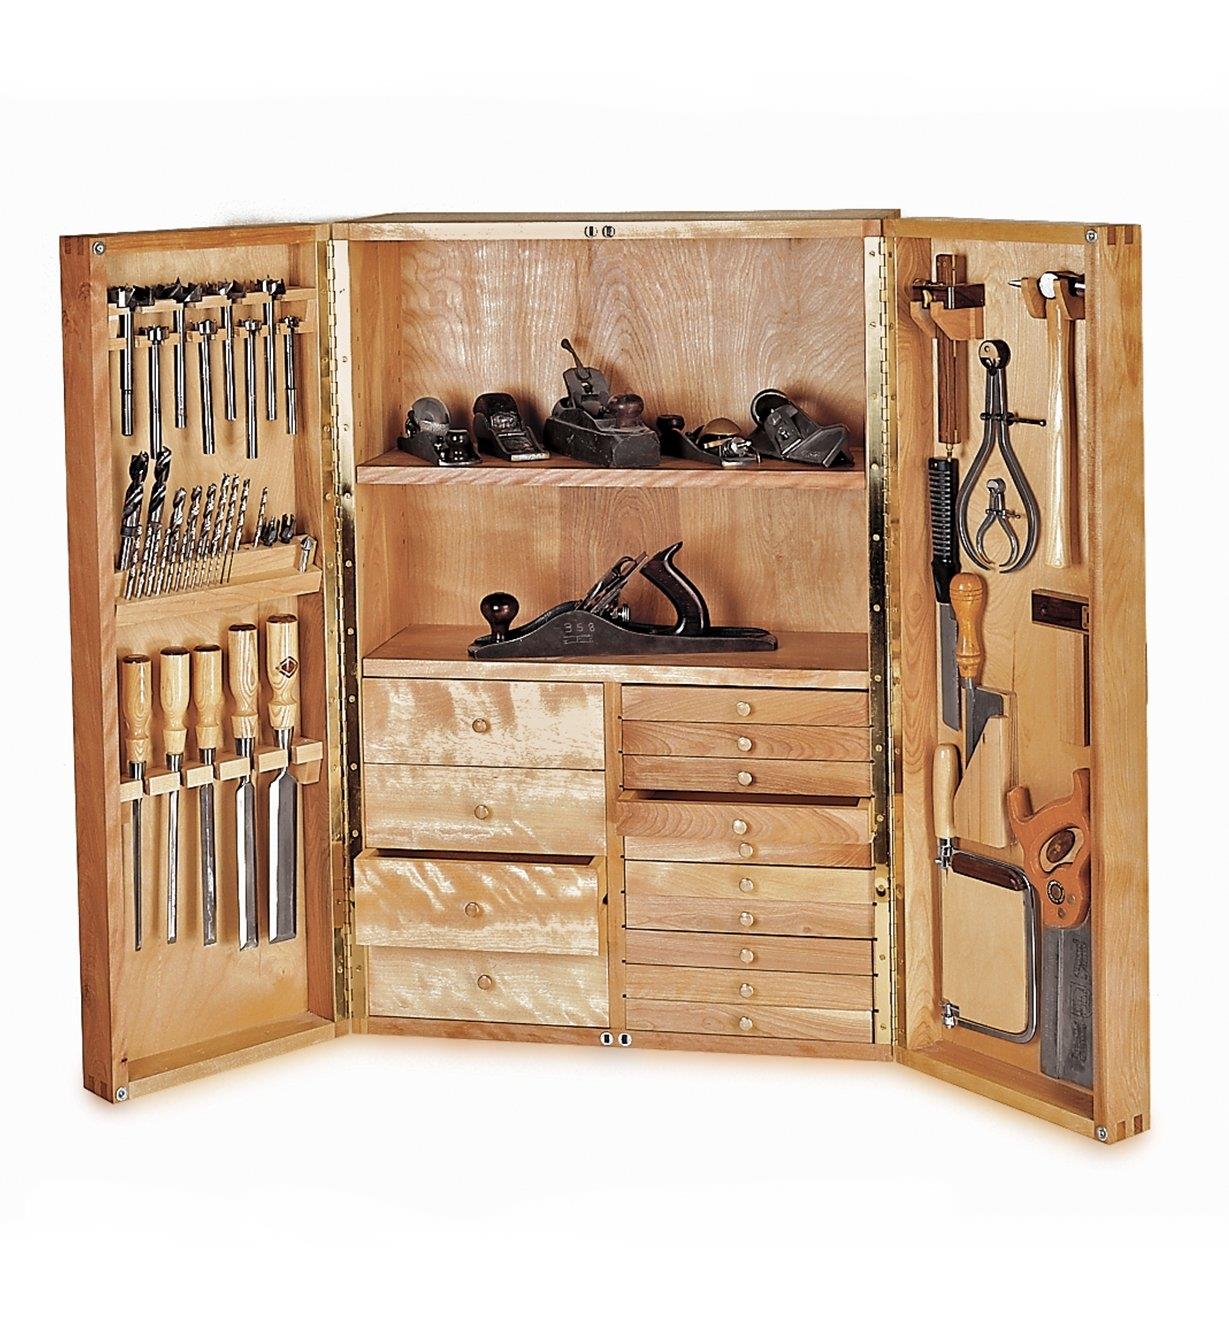 Example of completed Veritas Hanging Tool Cabinet